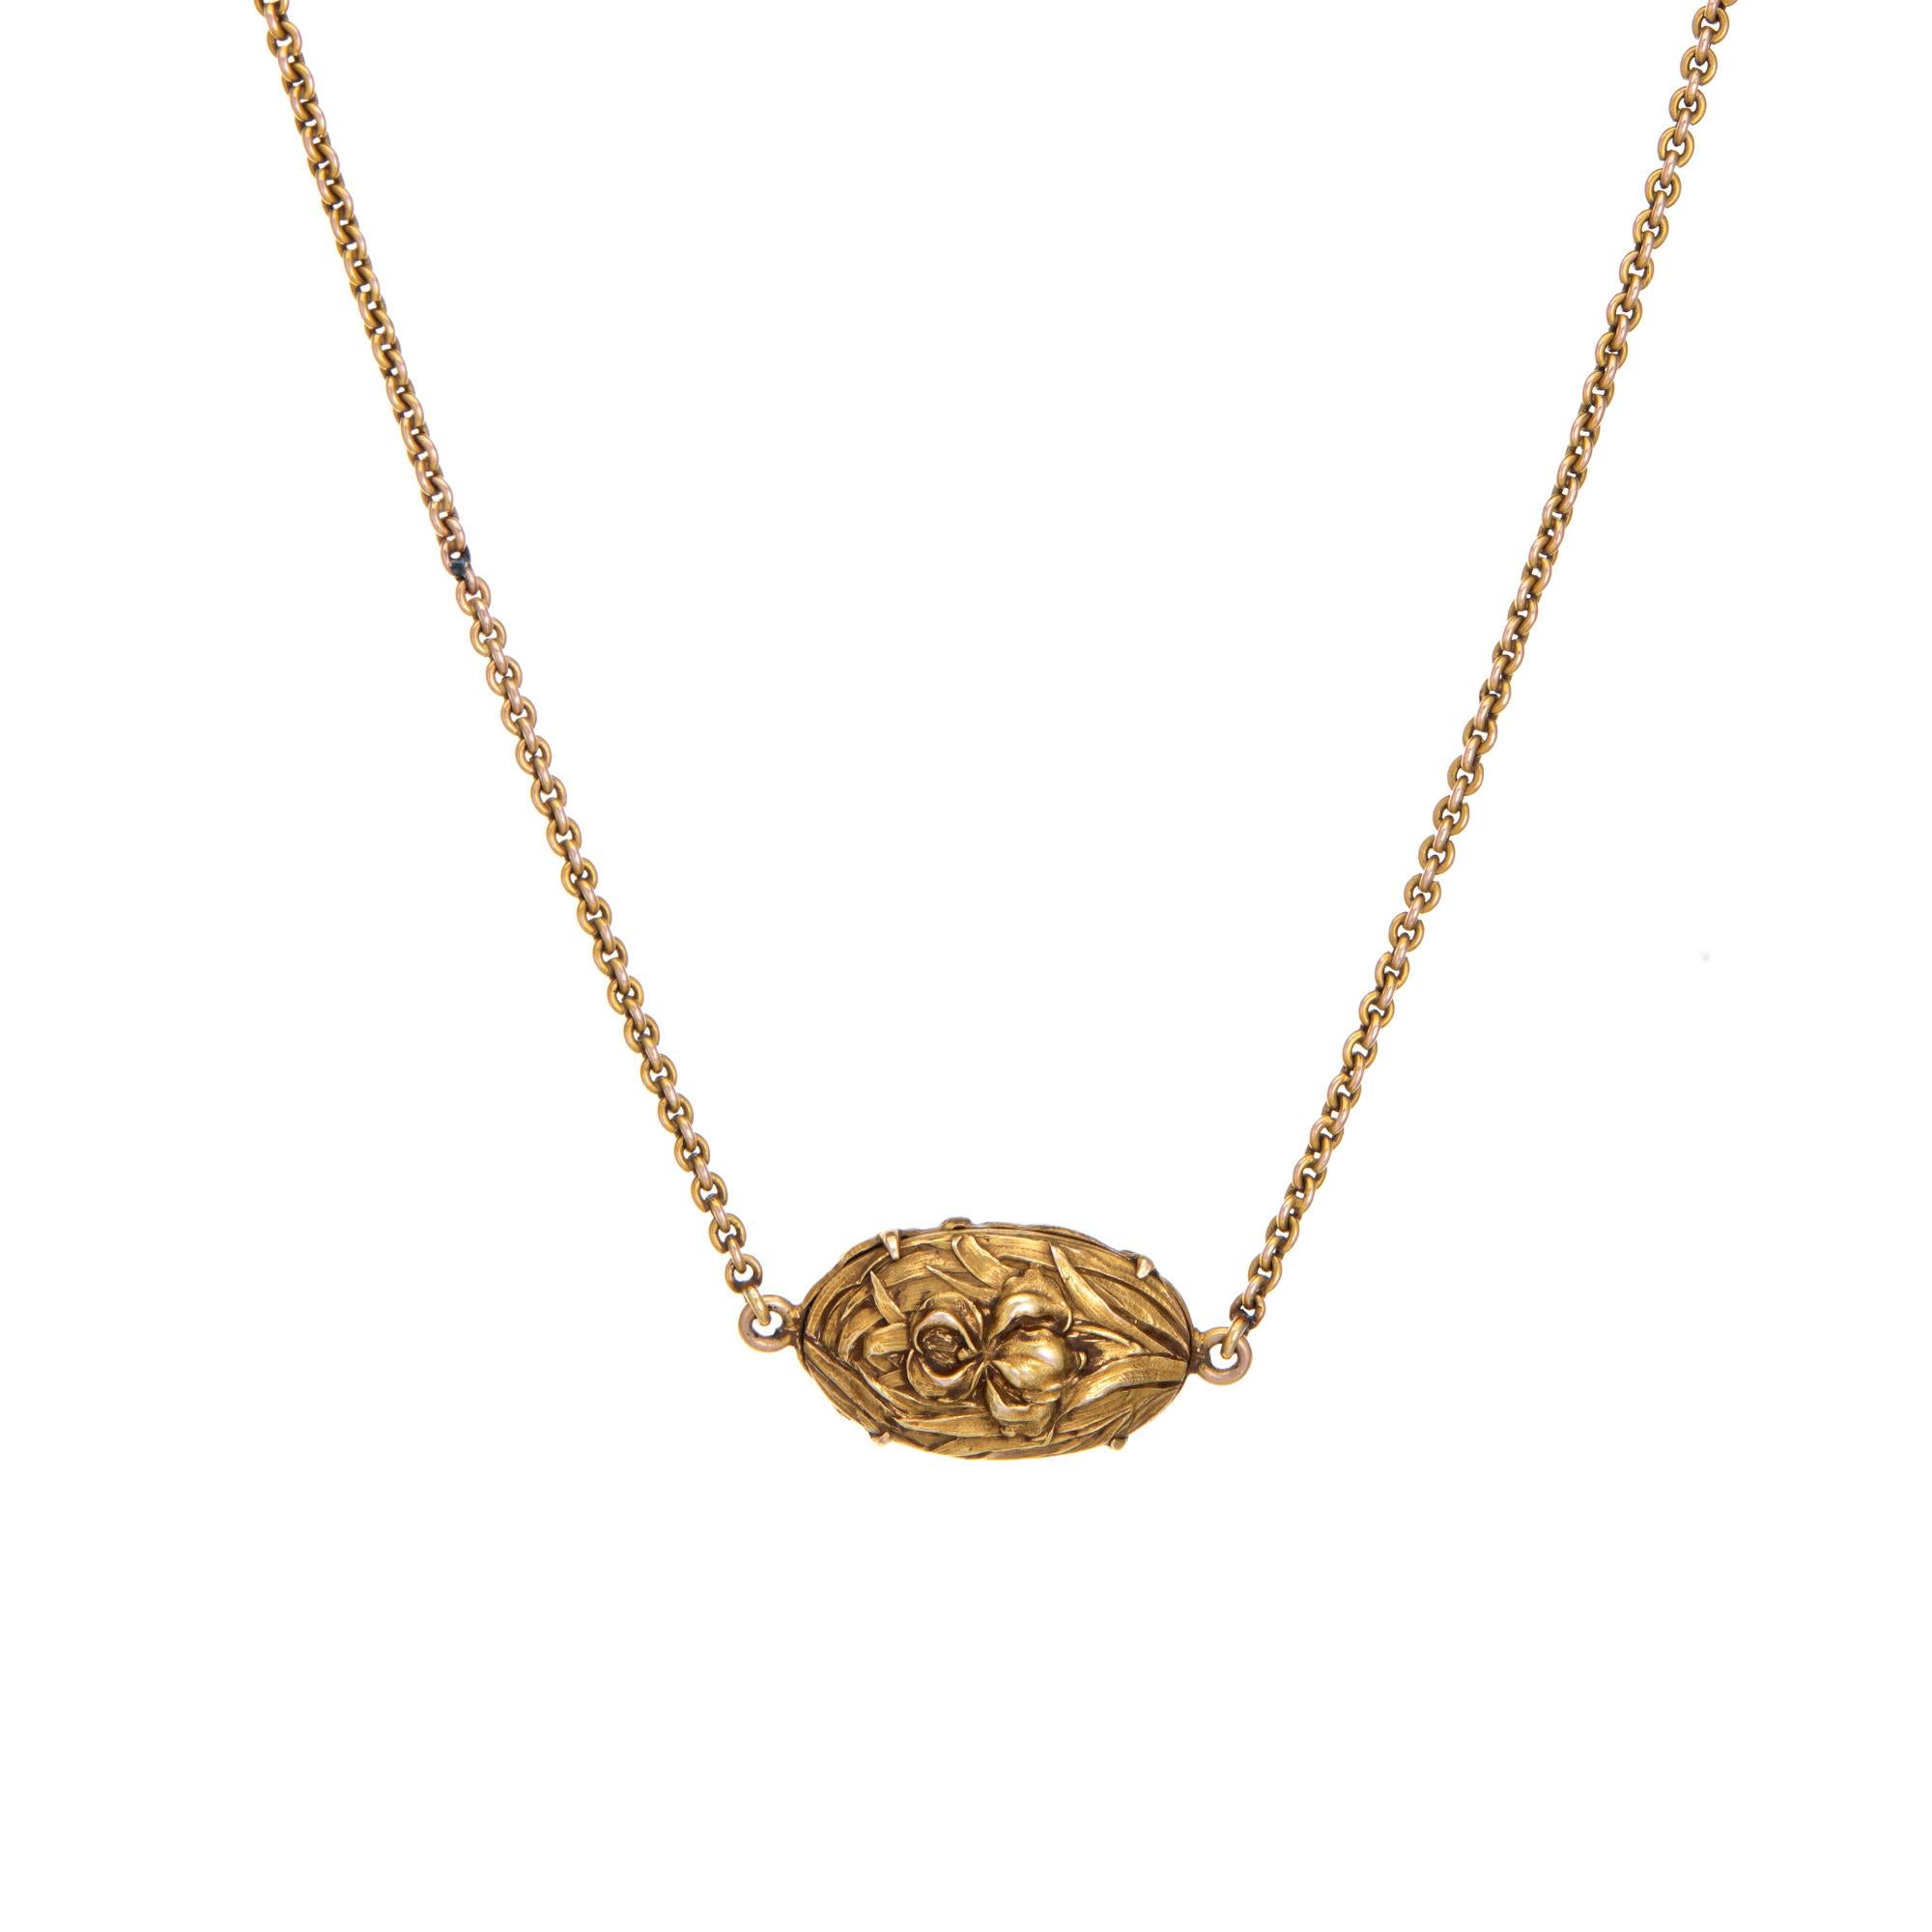 Stylish and finely detailed antique Art Nouveau watch chain necklace crafted in 14k yellow gold (circa 1900s to 1910s).  

Originally a watch chain, the floral embossed and turquoise set ornament is a unique feature of the chain. Measuring 16 1/2